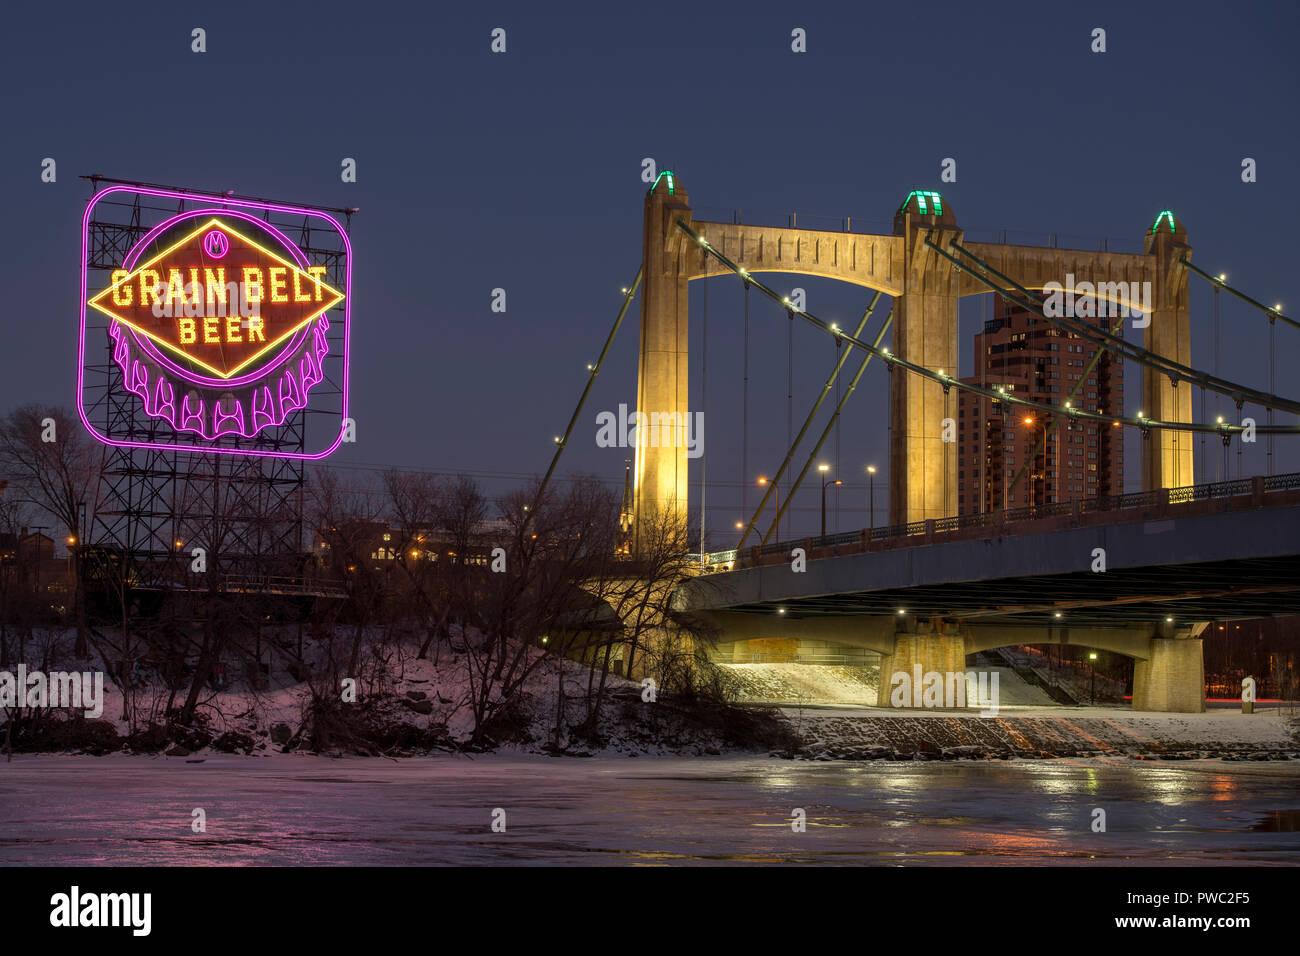 Historic Grain Belt Beer sign and Hennepin Avenue bridge along the Mississippi River in downtown Minneapolis, Minnesota. The sign is lit in Purple and Stock Photo